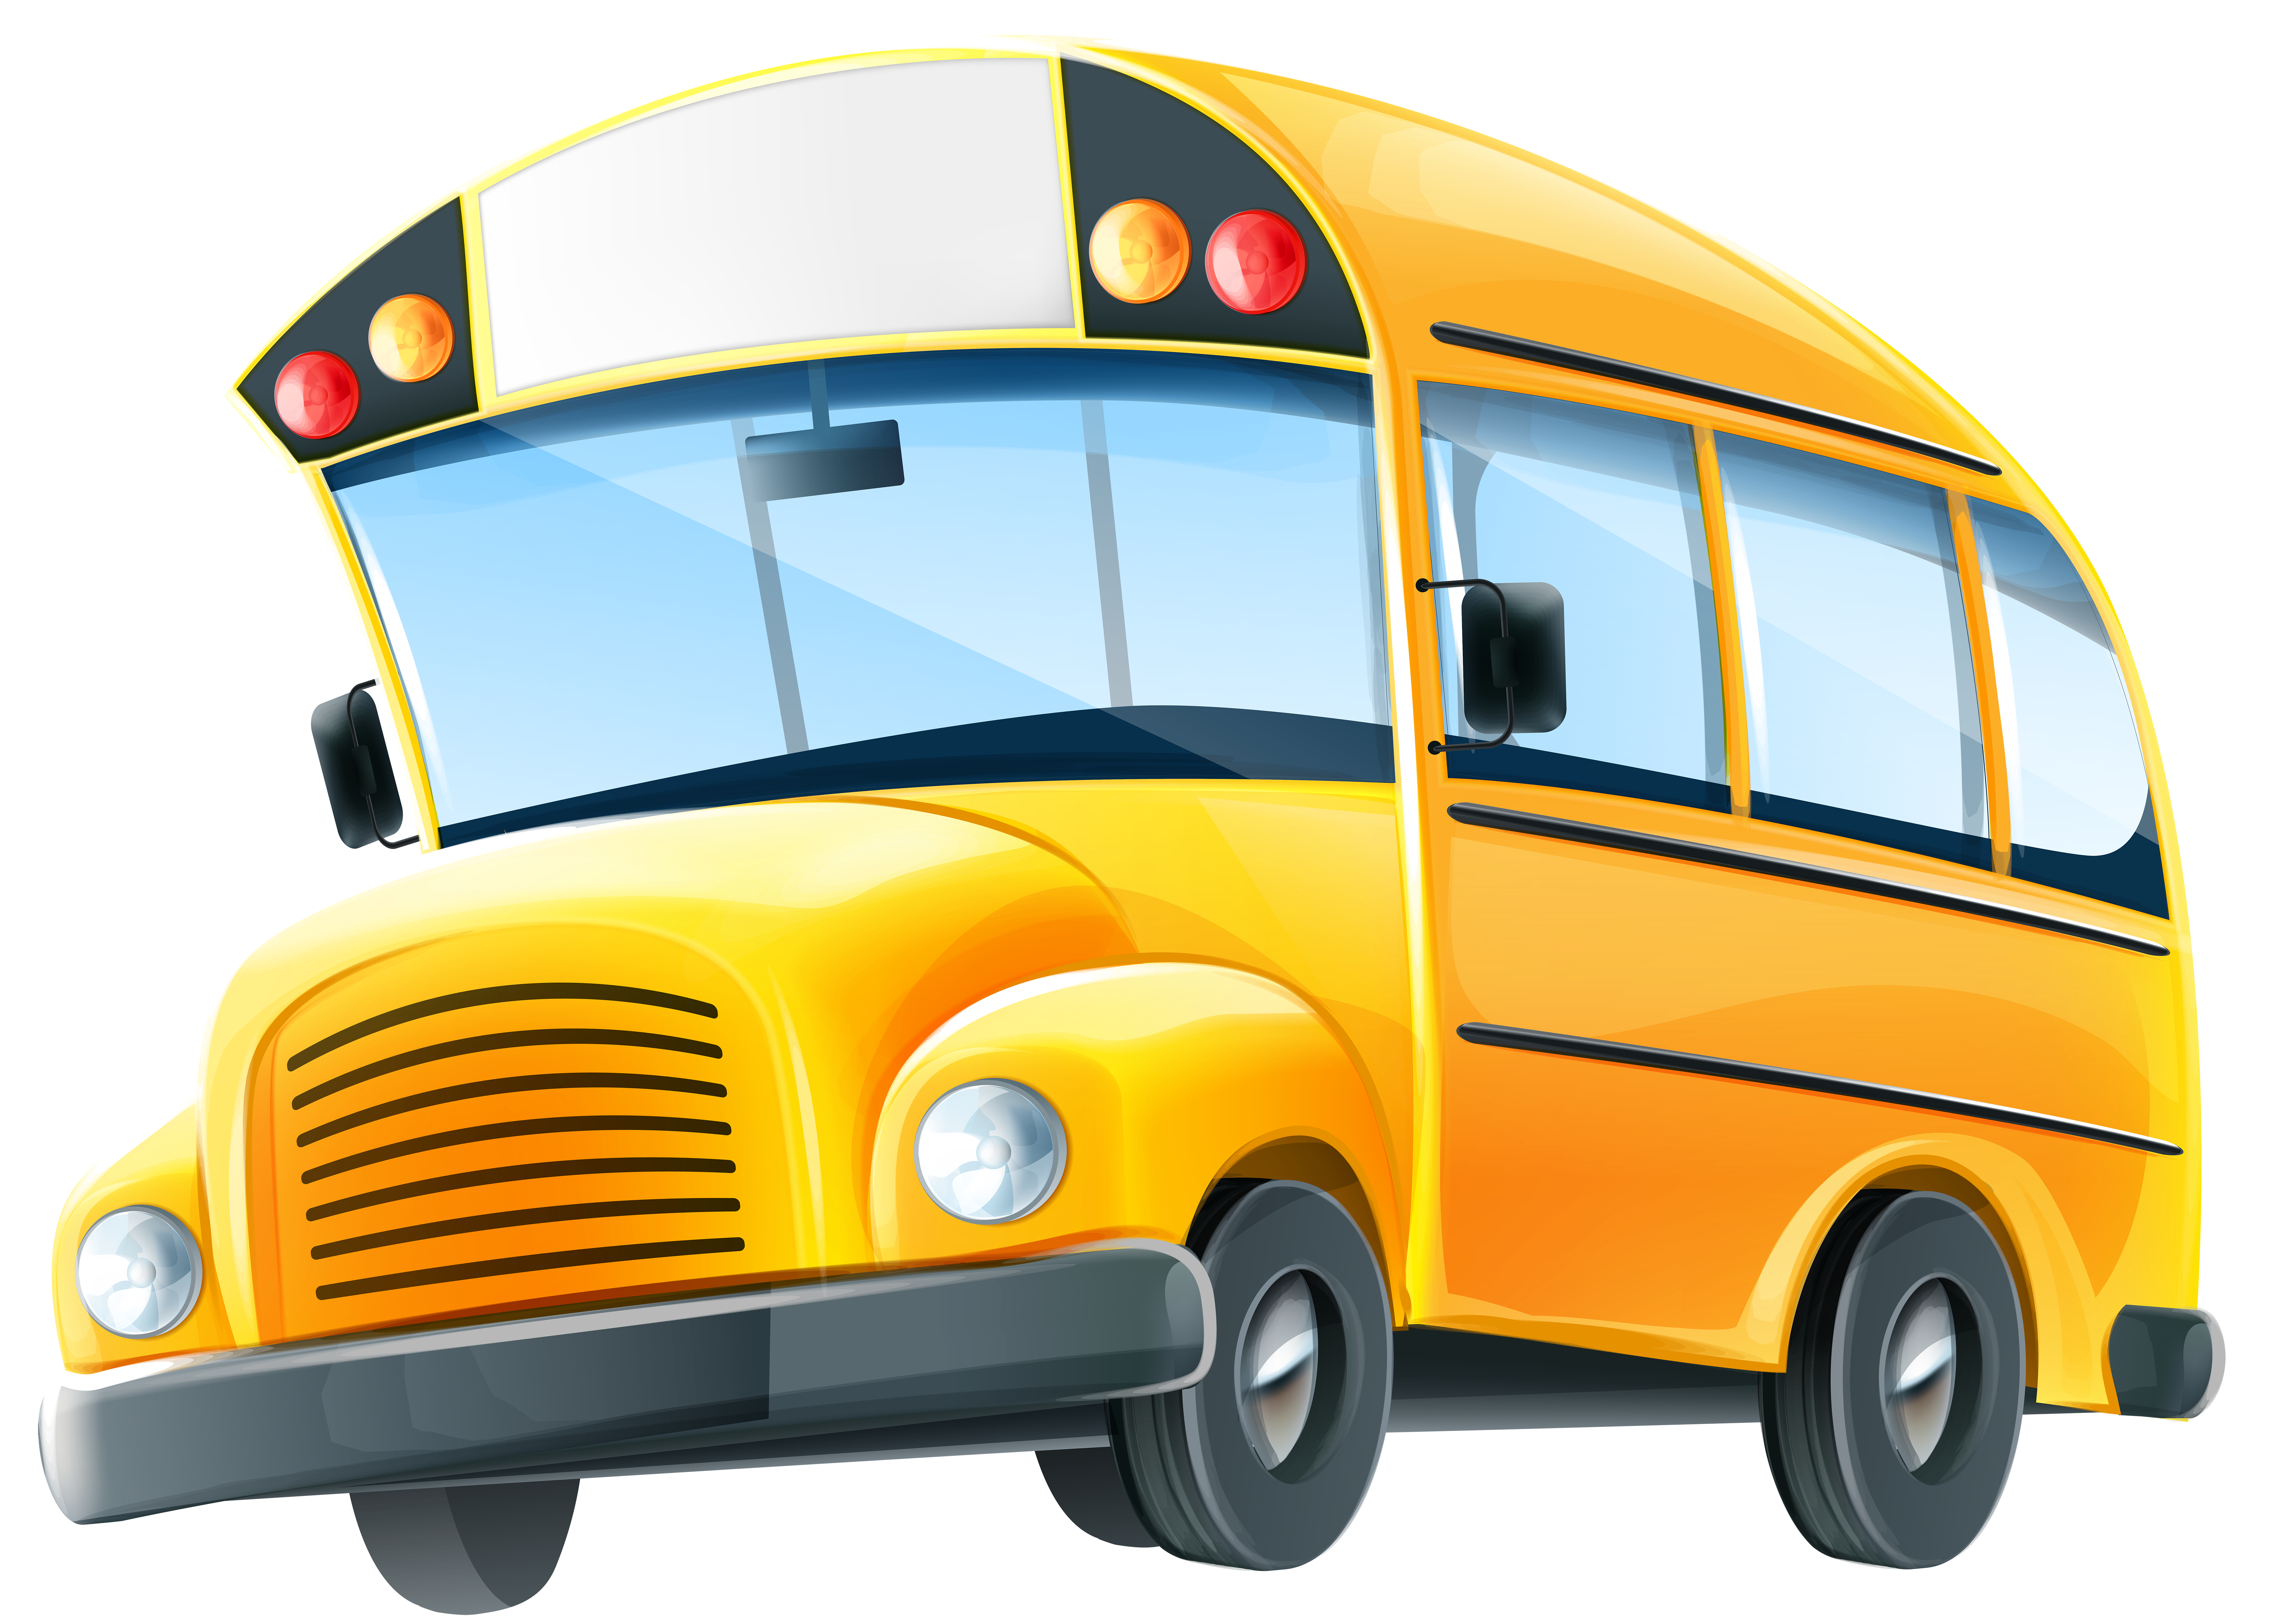 Clipart bus cartoon Clipart bus cartoon Transparent FREE for download on WebStockReview 2021